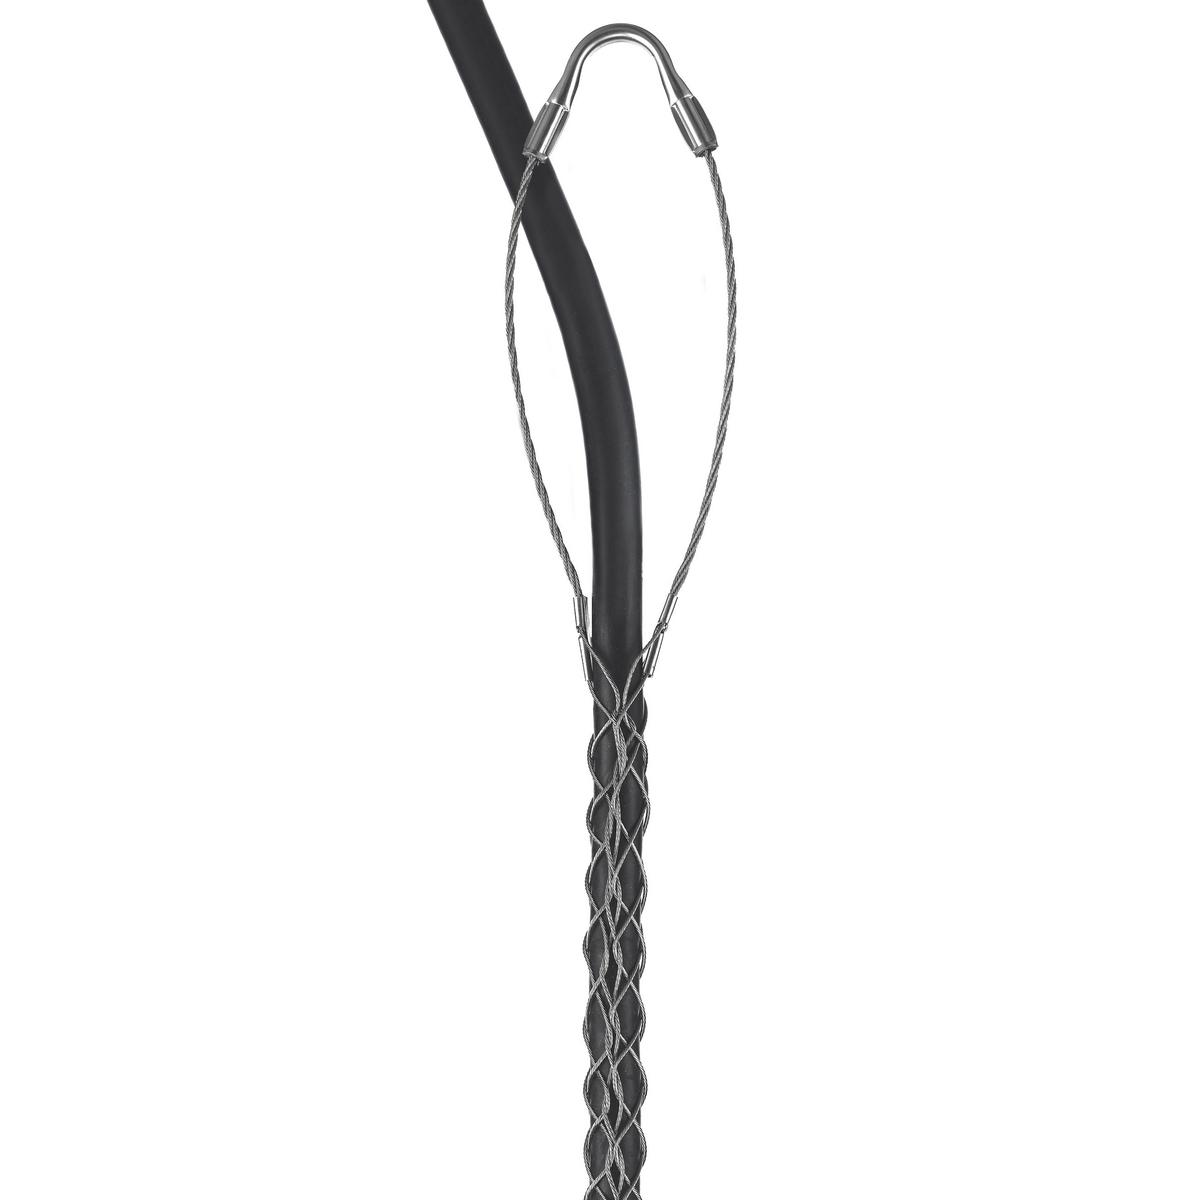 Hubbell 02402013 Support Grips, Single Eye, Single Weave, Split Mesh, Lace Closing, Stainless Steel, 0.50-0.62"  ; Single eye ; Strand equalizers position wires for equal loading throughout grip length ; Eye assemblies provide eye reinforcement at support hardware ; Split